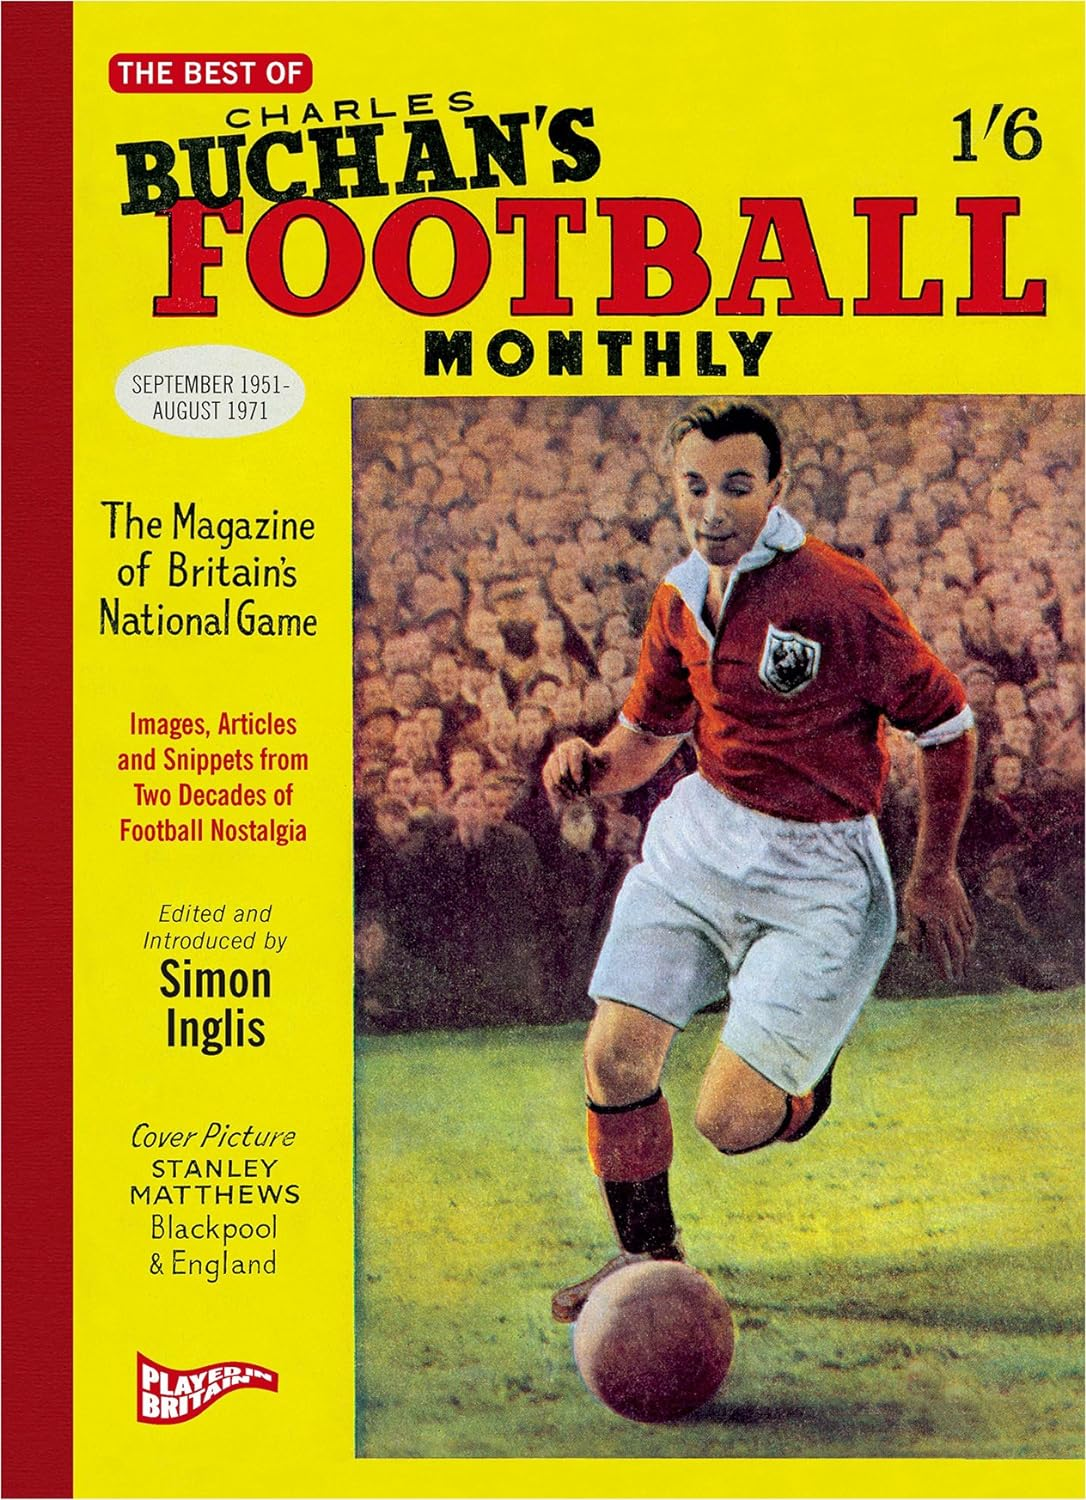 The Best Of Charles Buchan's Football Monthly